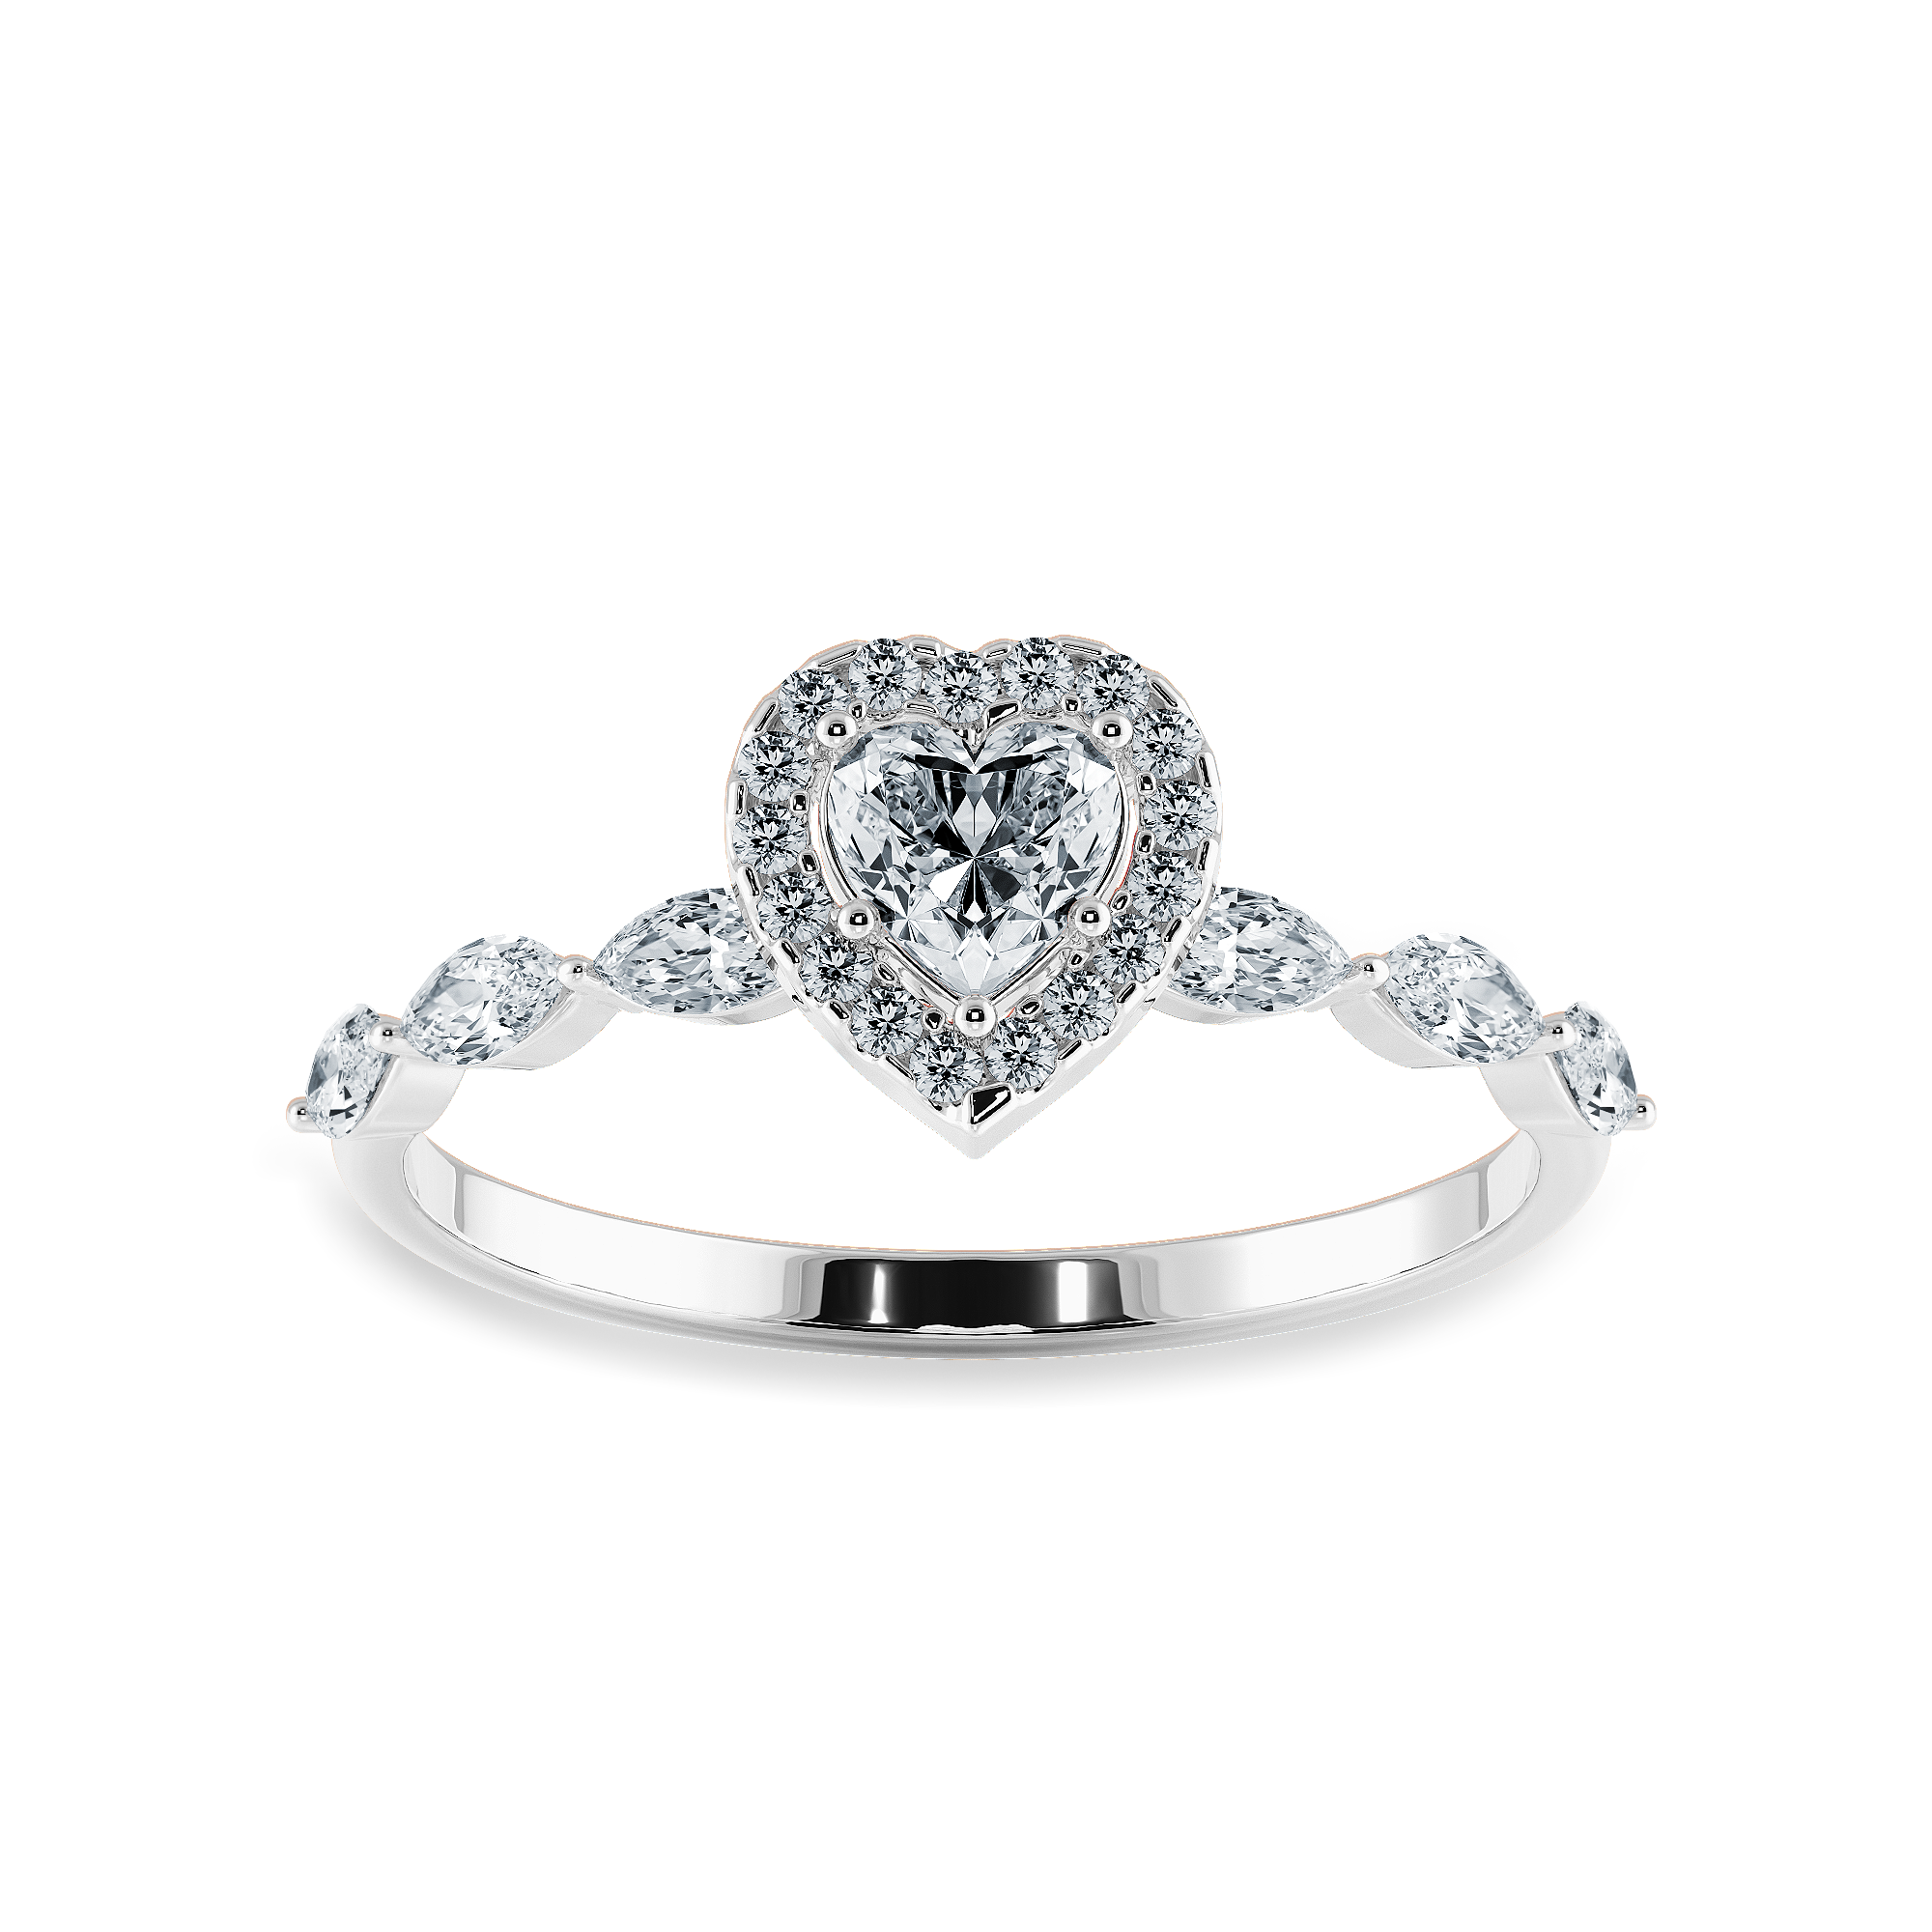 30-Pointer Heart Cut Solitaire Halo Diamonds with Marquise Cut Diamonds Accents Platinum Ring JL PT 1273